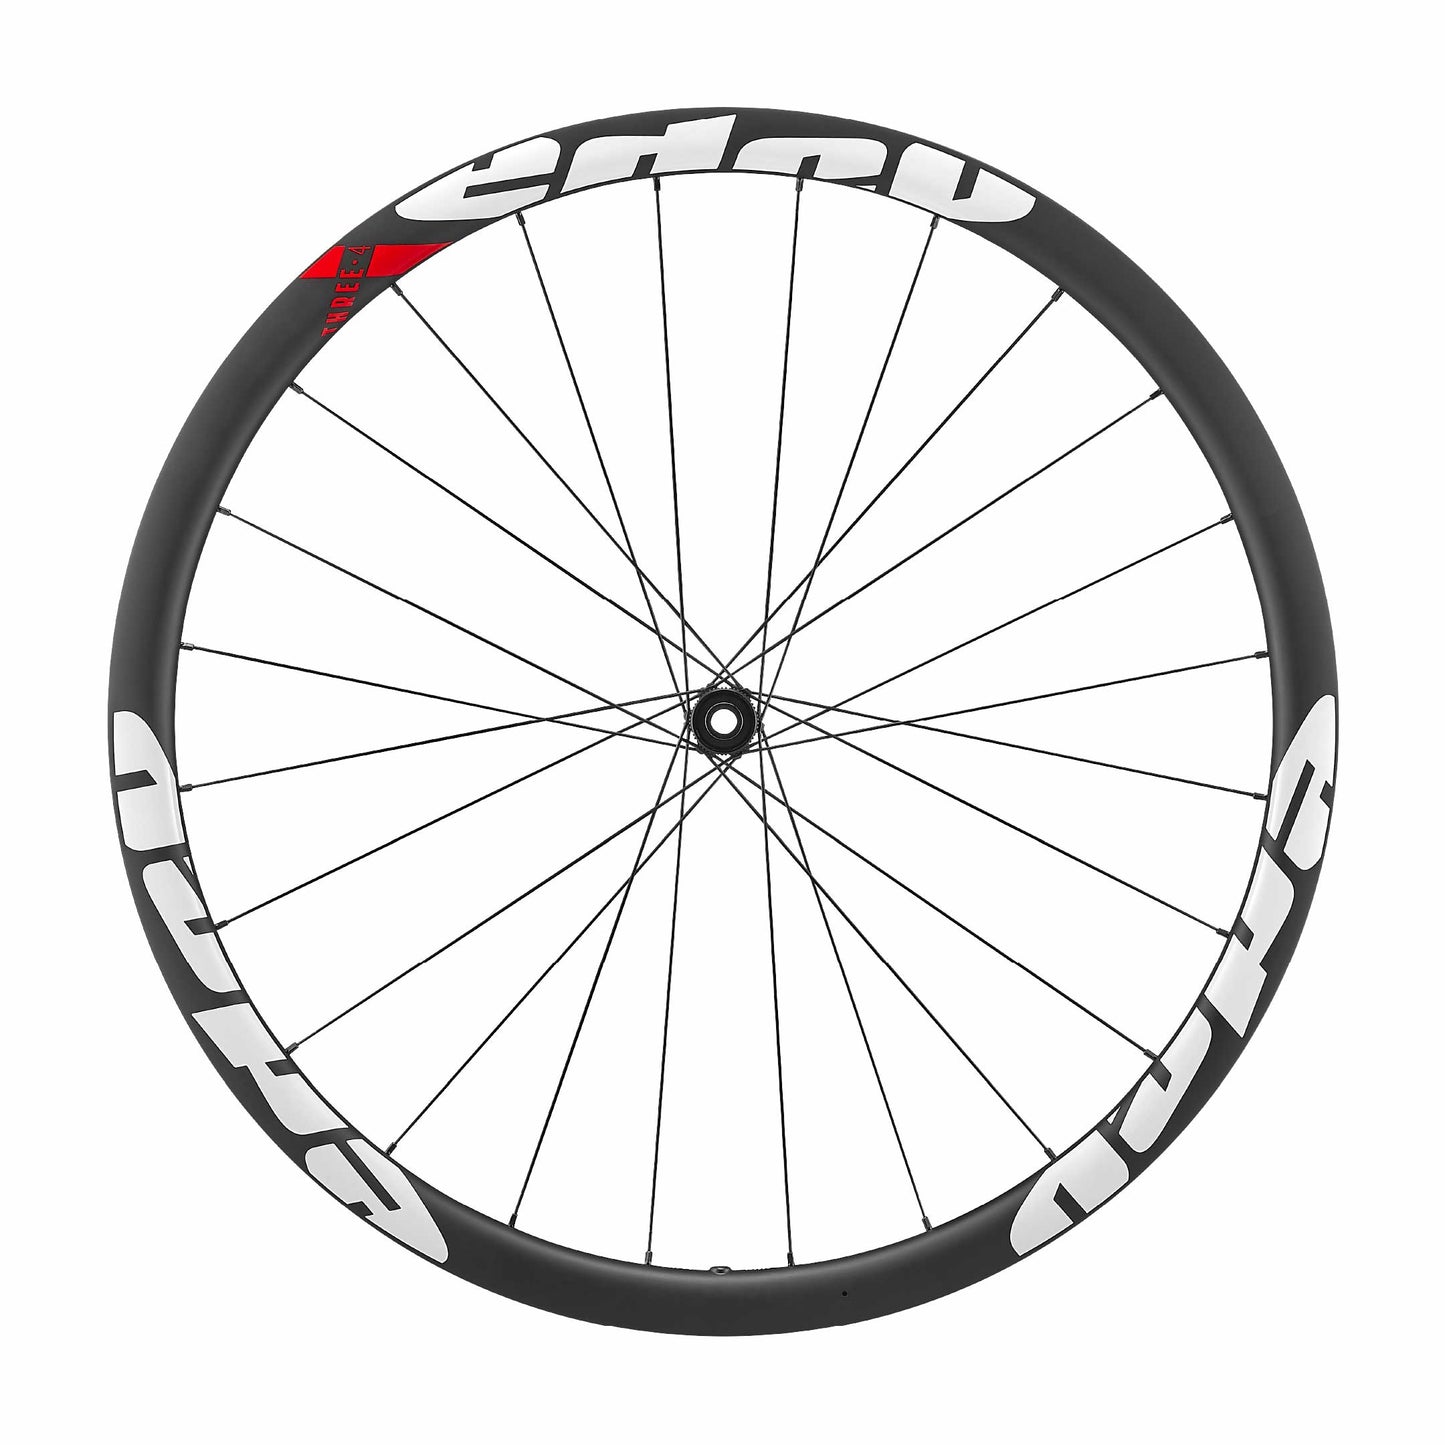 34mm deep carbon fibre wheelset with red white logos